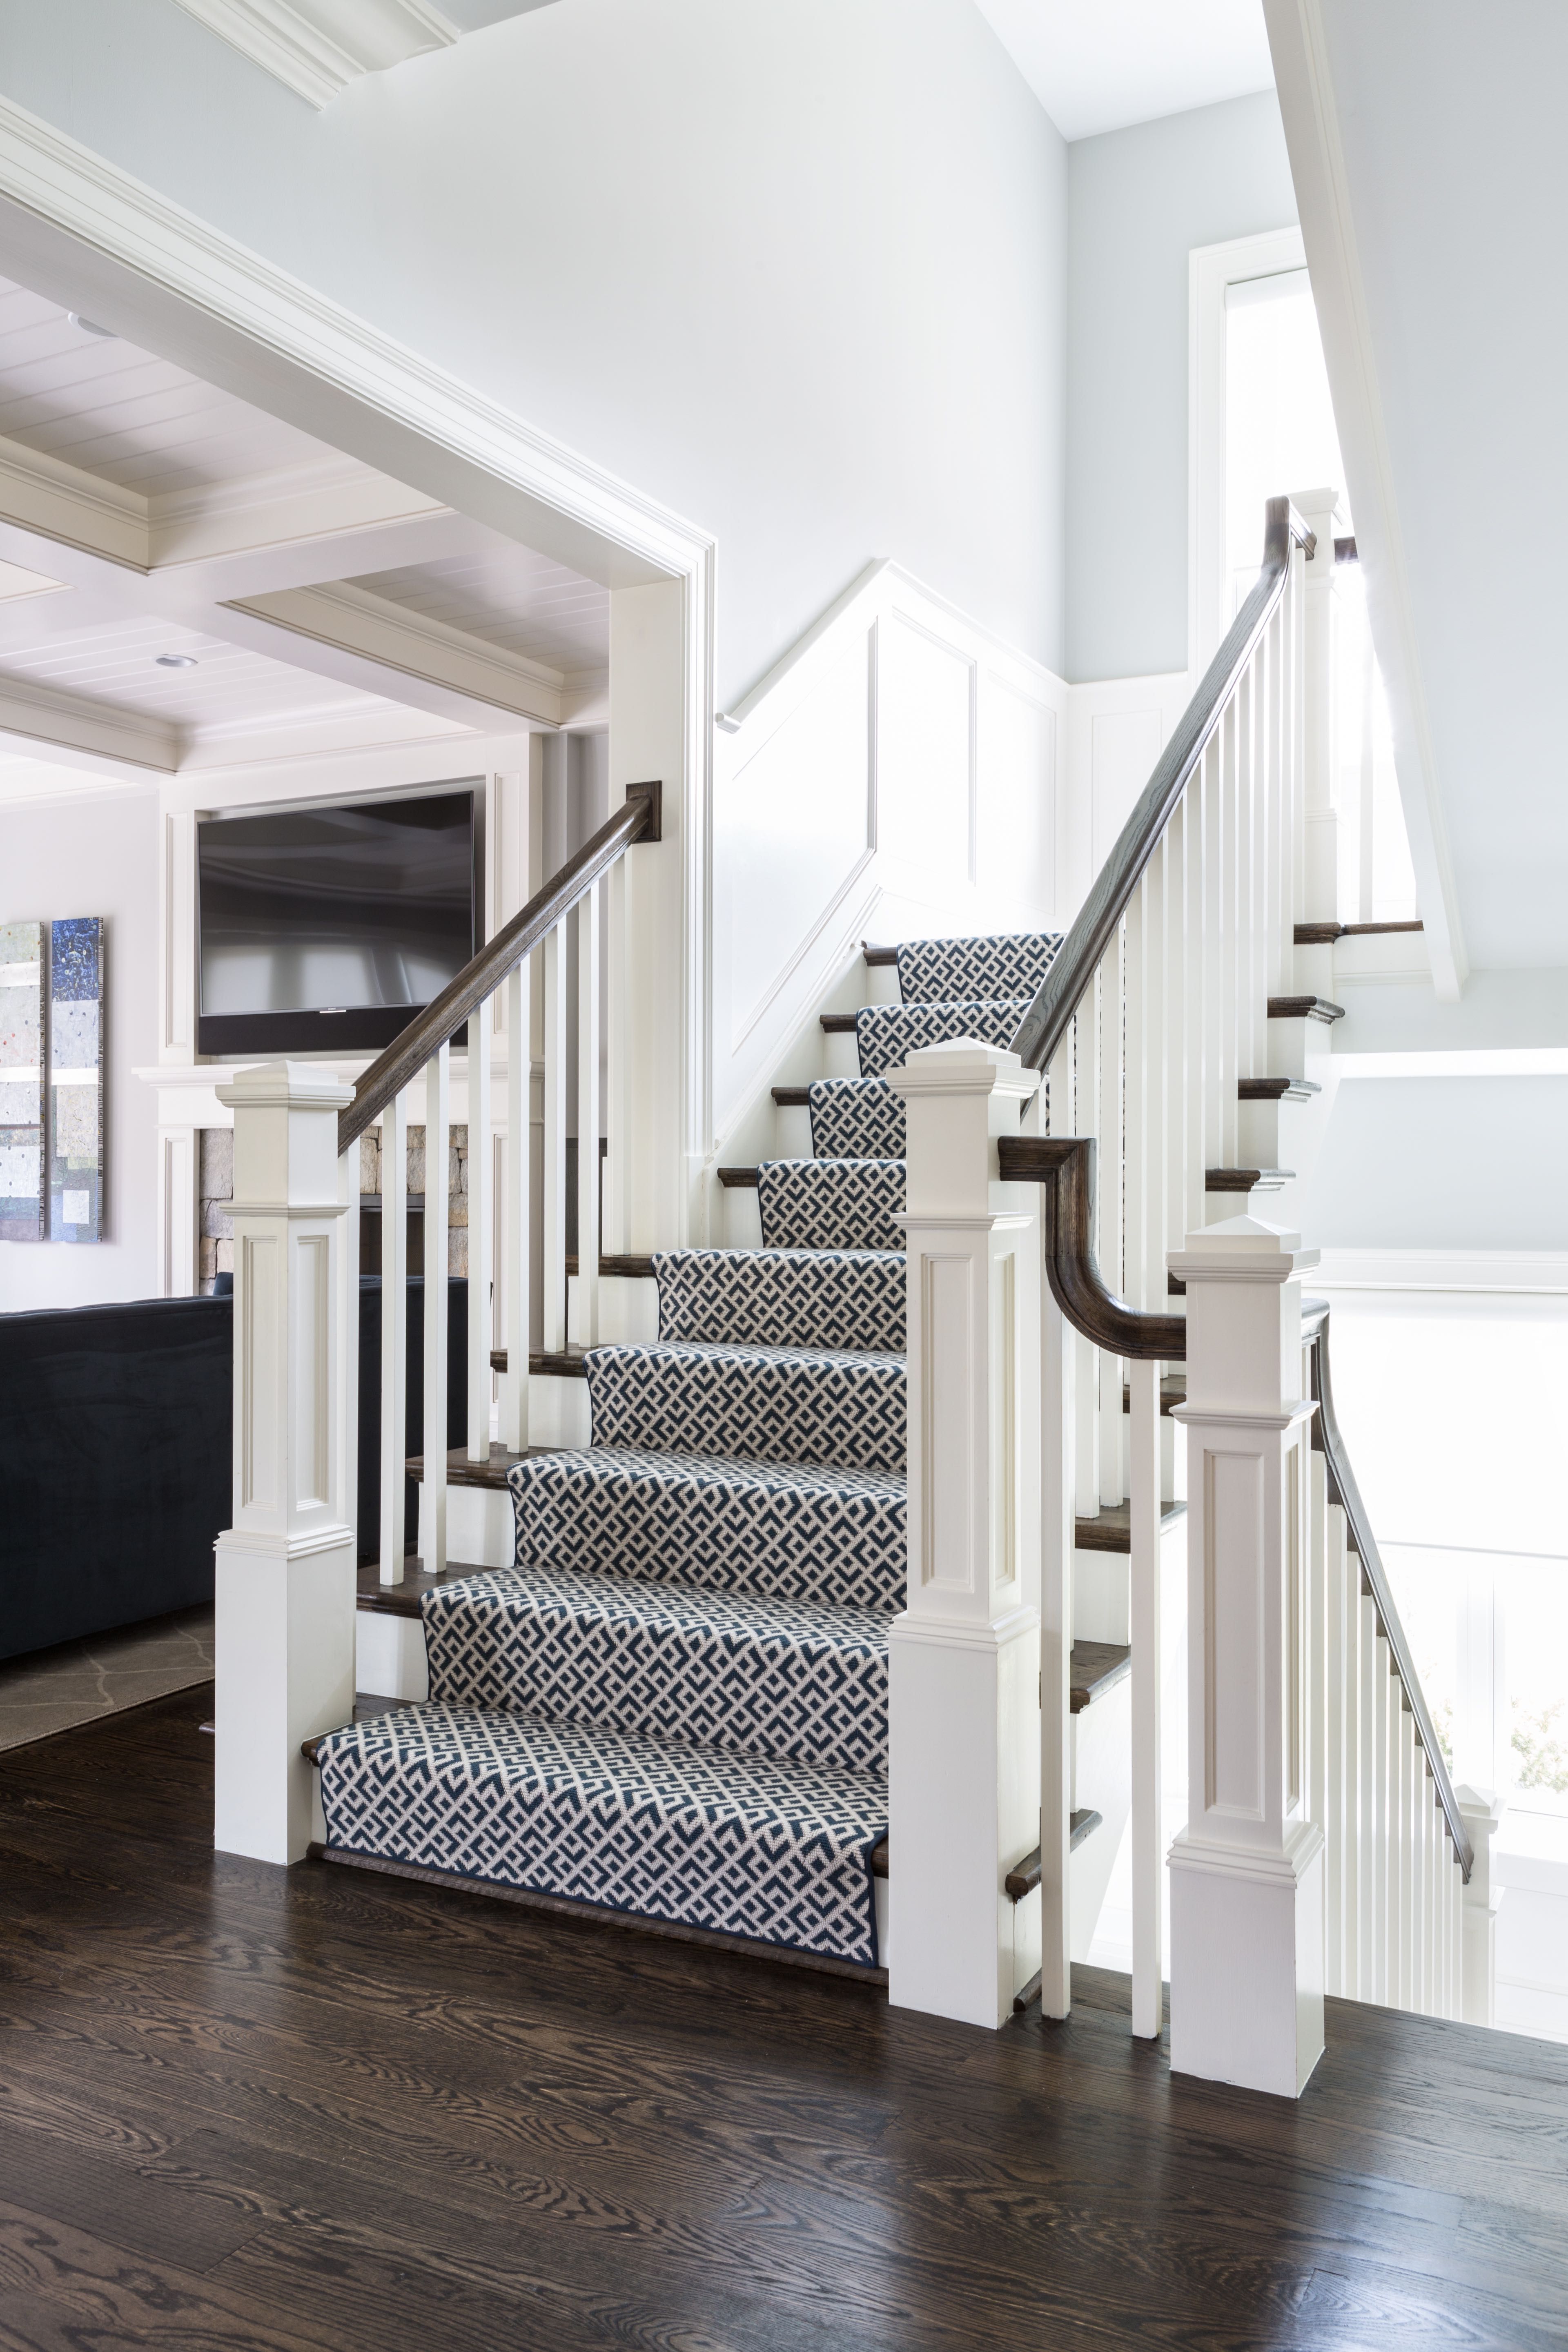 25 stunning carpeted staircase ideas - most beautiful staircase